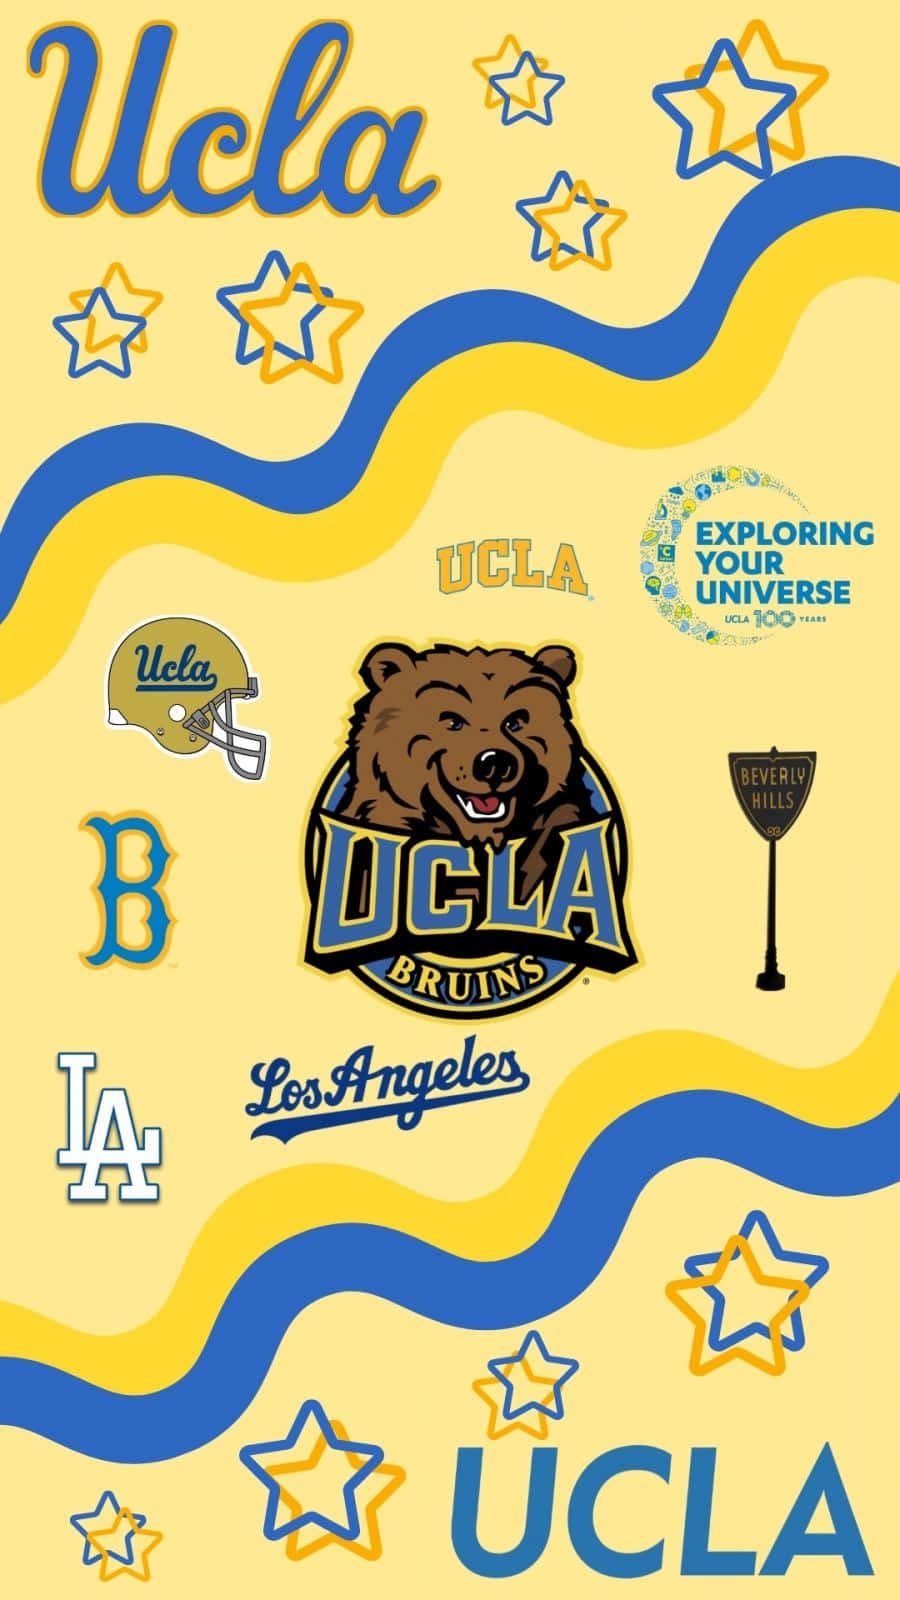 Start of a new adventure at UCLA campus. Wallpaper